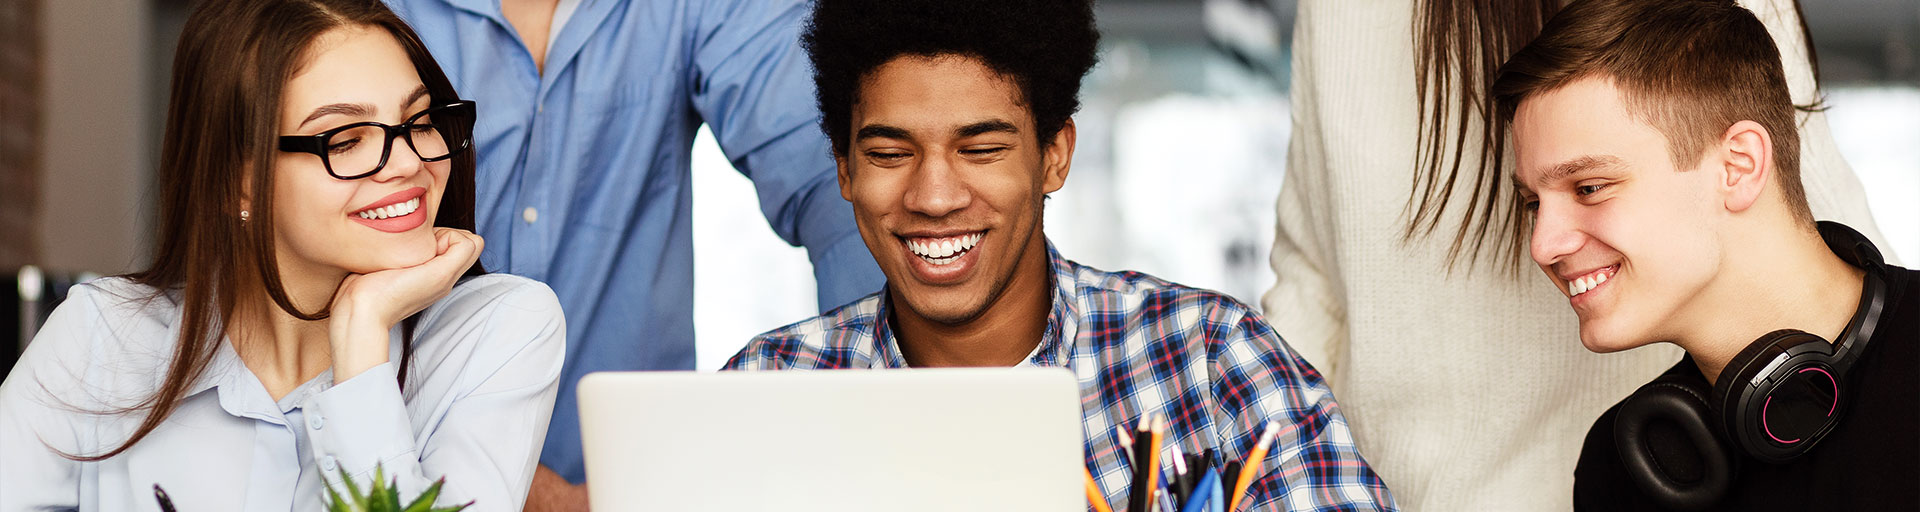 three students looking at laptop smiling